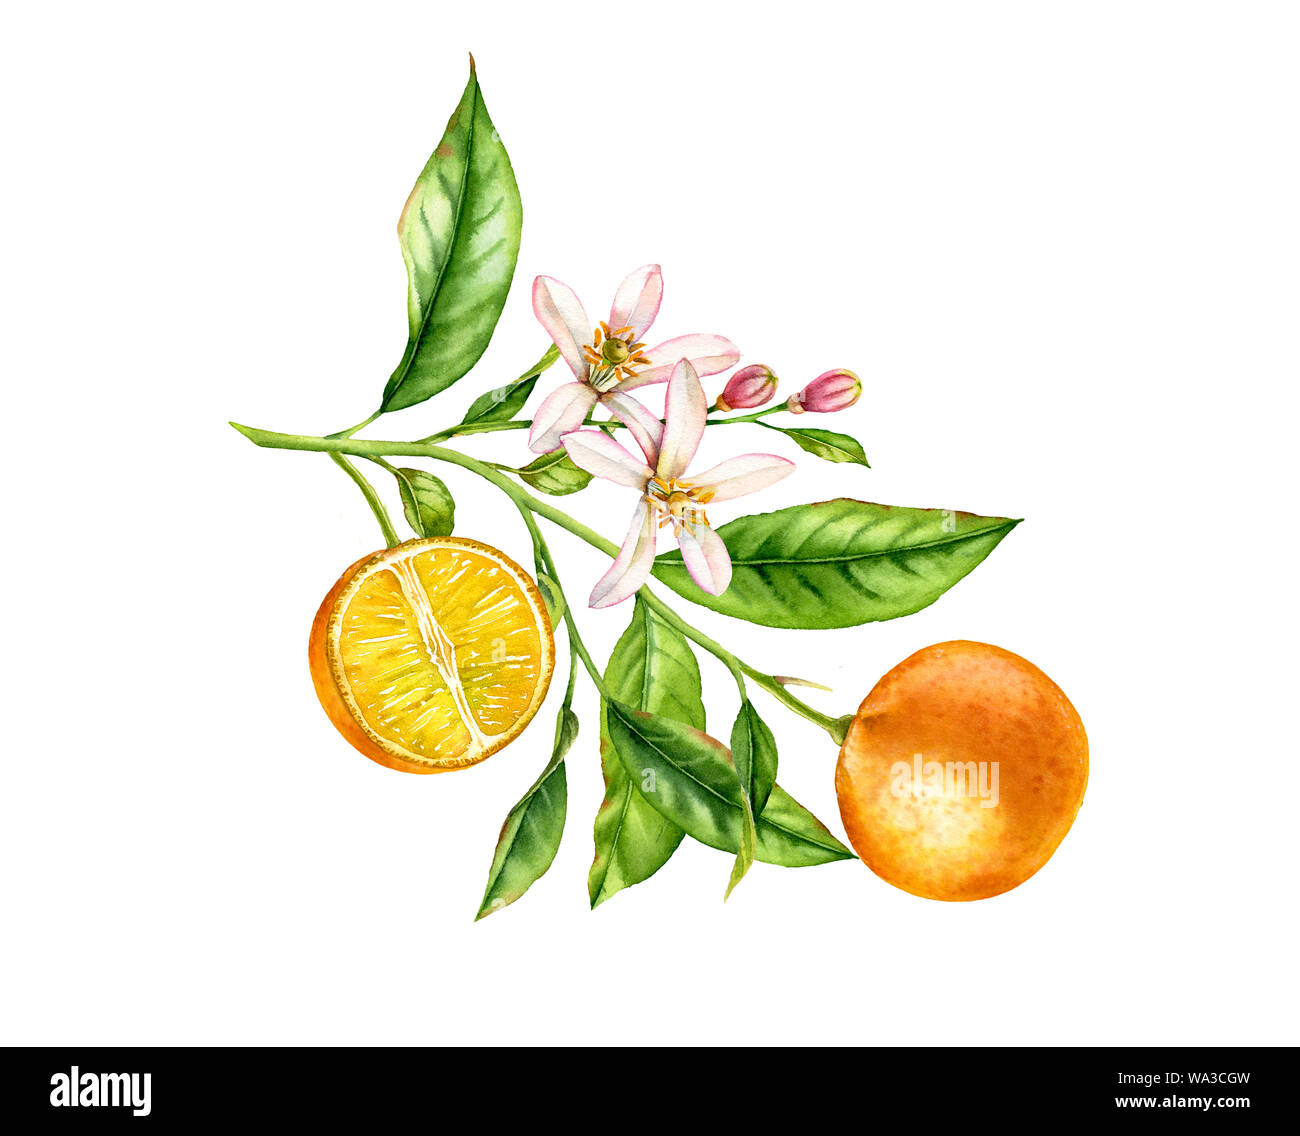 Orange fruit branch with flowers. Realistic botanical watercolor illustration with half slice citrus, hand drawn isolated floral design on white for f Stock Photo